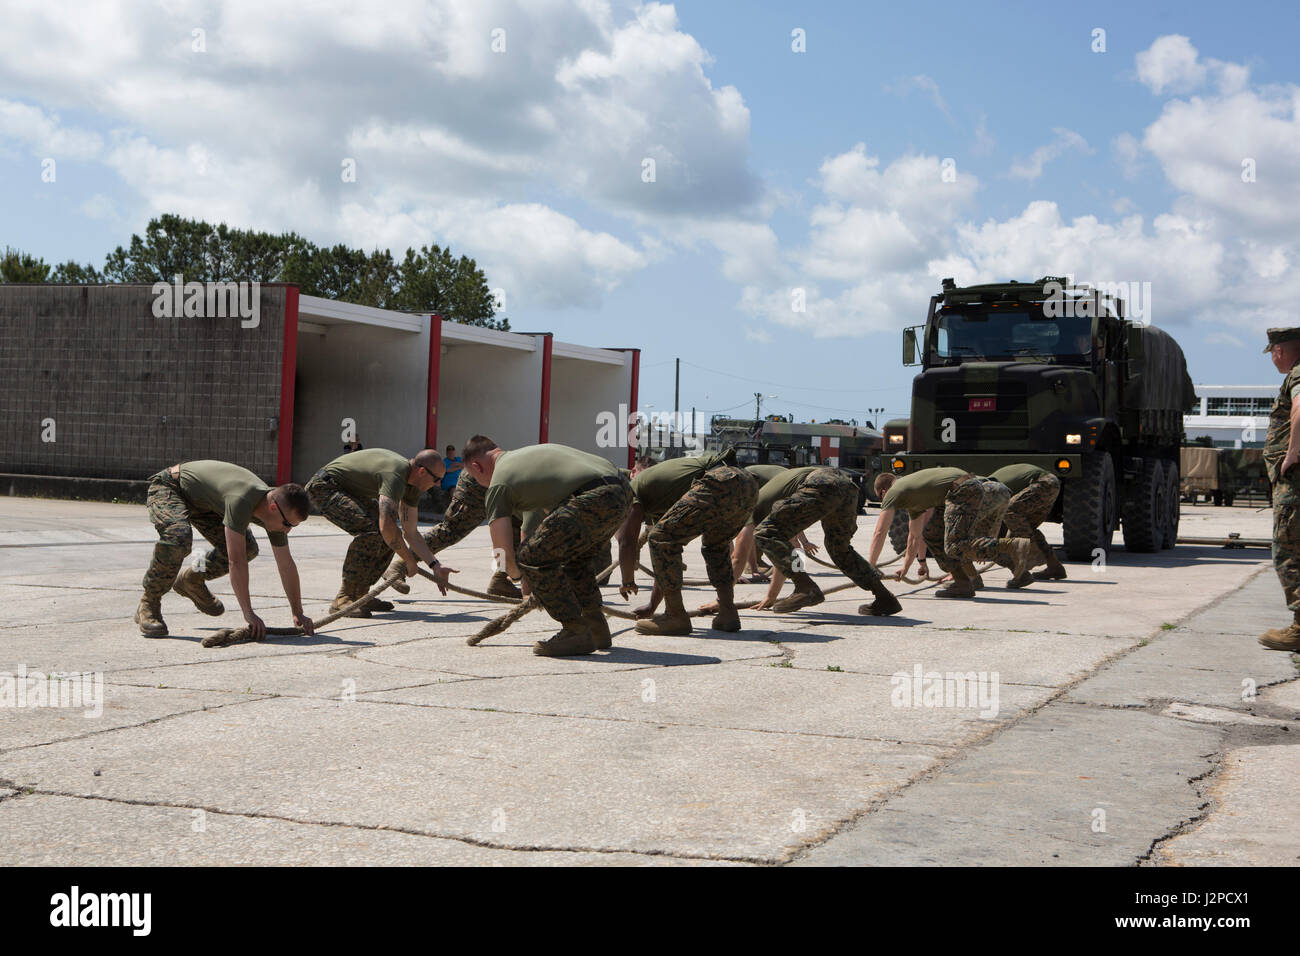 U.S. Marines with Headquarters and Supply Company, 2nd Assault Amphibian Battalion, 2d Marine Division (2d MARDIV), participate in the 7-ton pulling portion of the 2017 Gator games squad competition at Courthouse Bay on Camp Lejeune, N.C., April 20, 2017.Personnel participated in the 2nd Assault Amphibian Battalion squad competition to increase the overall confidence, unit cohesion and moral of junior and senior Marines. (U.S. Marine Corps photo by Lance Cpl. Angel Travis) Stock Photo